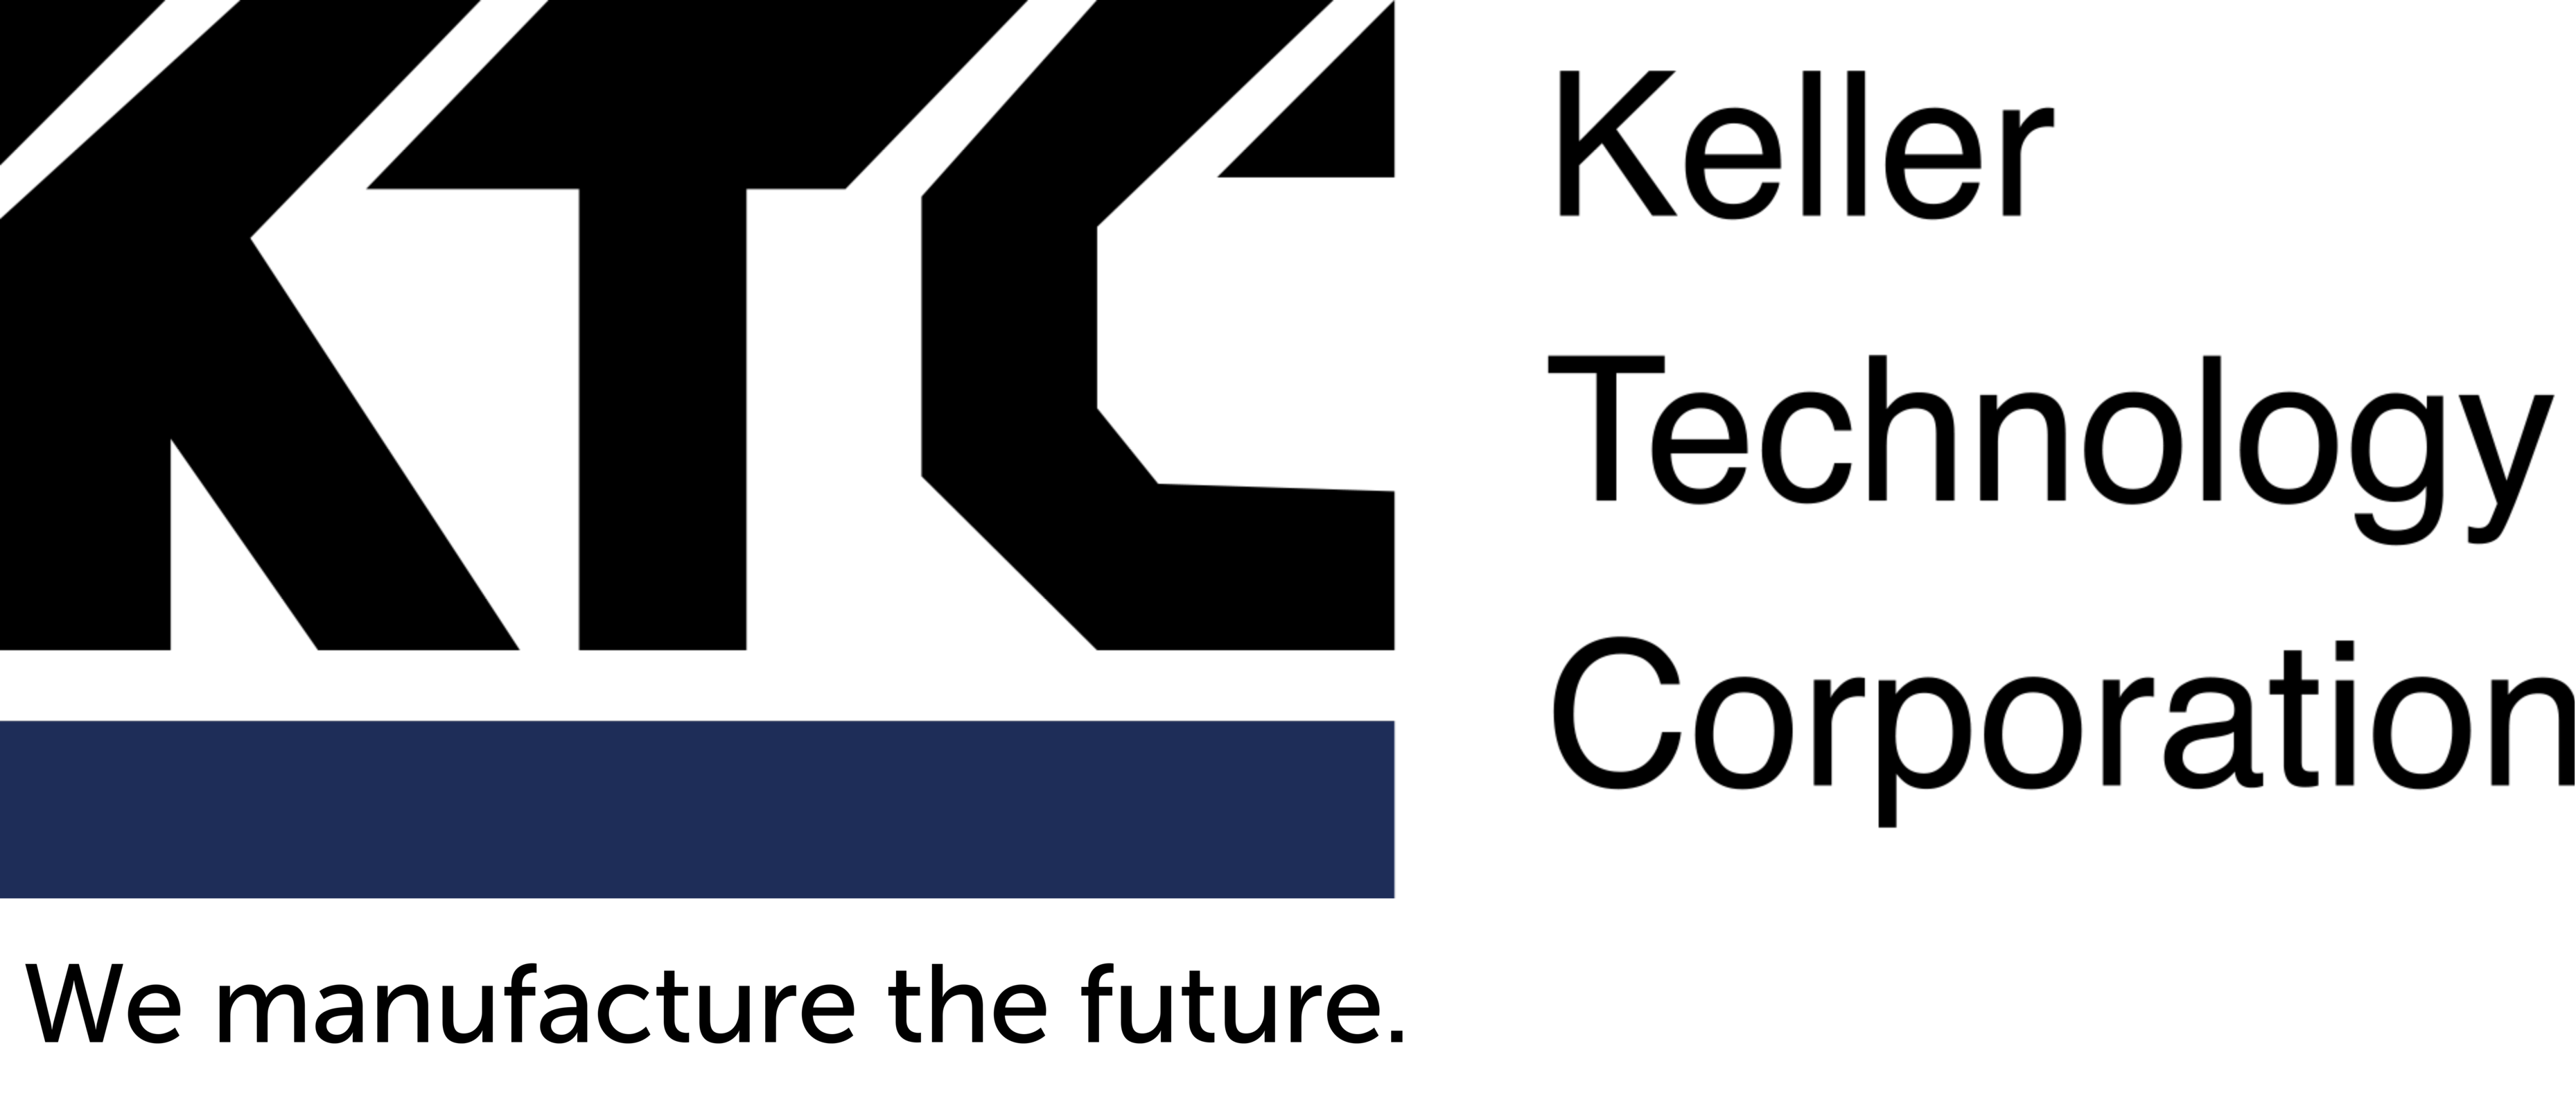 Keller Technology Corporation  Integrated Manufacturing Solutions